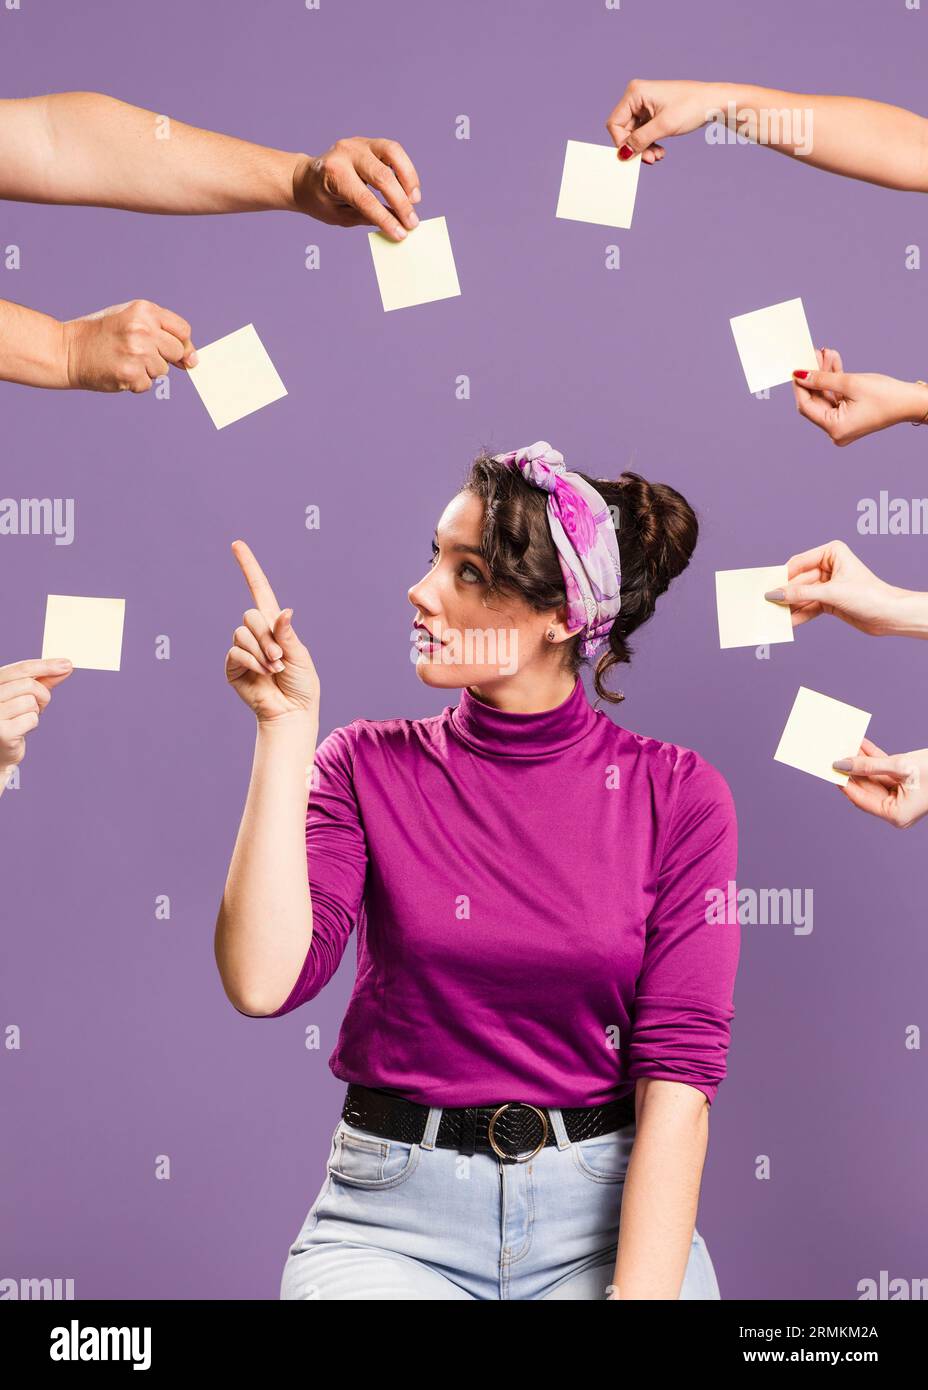 Woman surrounded by hands sticky notes picking empty note Stock Photo